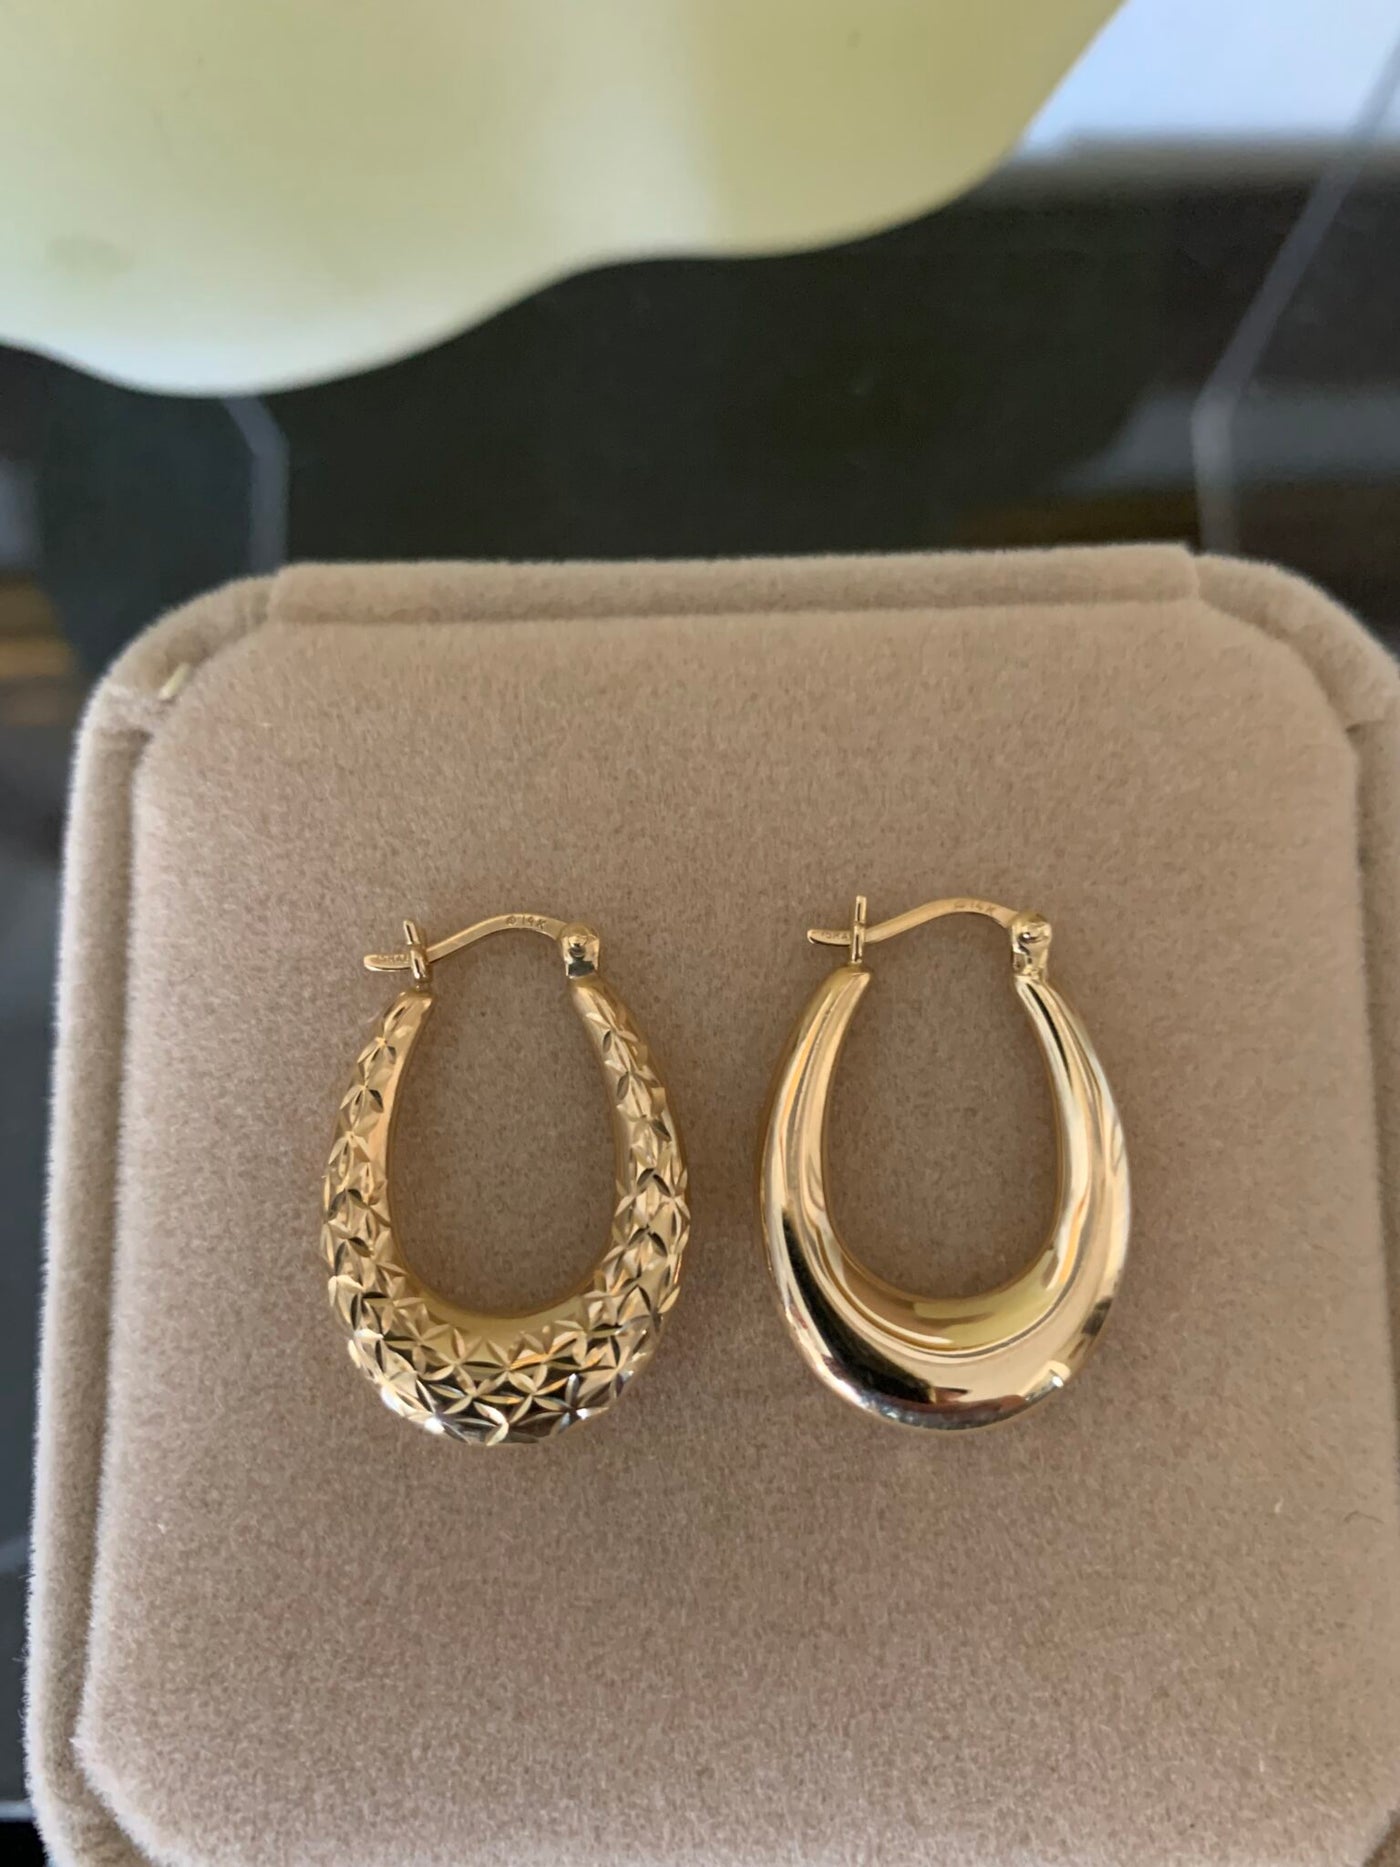 Solid 14K Yellow Gold Oval Hoop Earrings with Diamond Cut Design